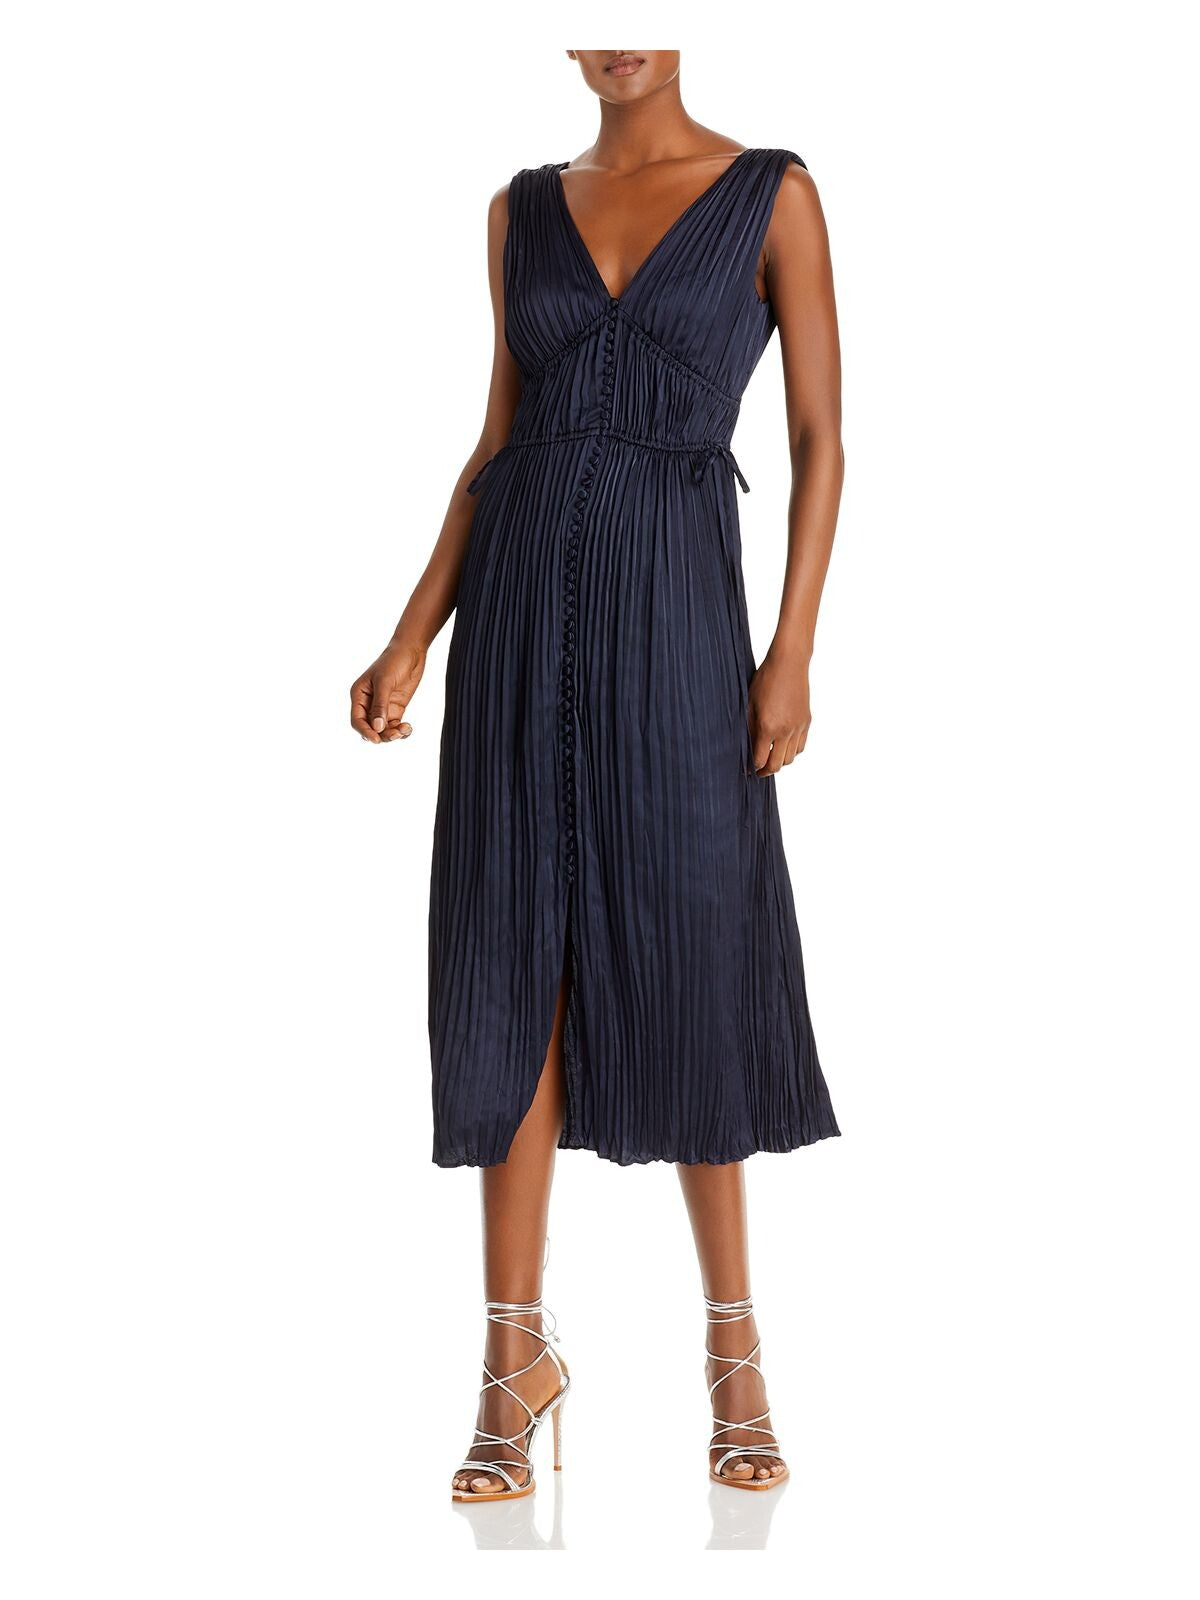 REBECCA TAYLOR Womens Navy Lined Tie Accordion Pleat Button Down Sleeveless V Neck Midi Evening Fit + Flare Dress XS